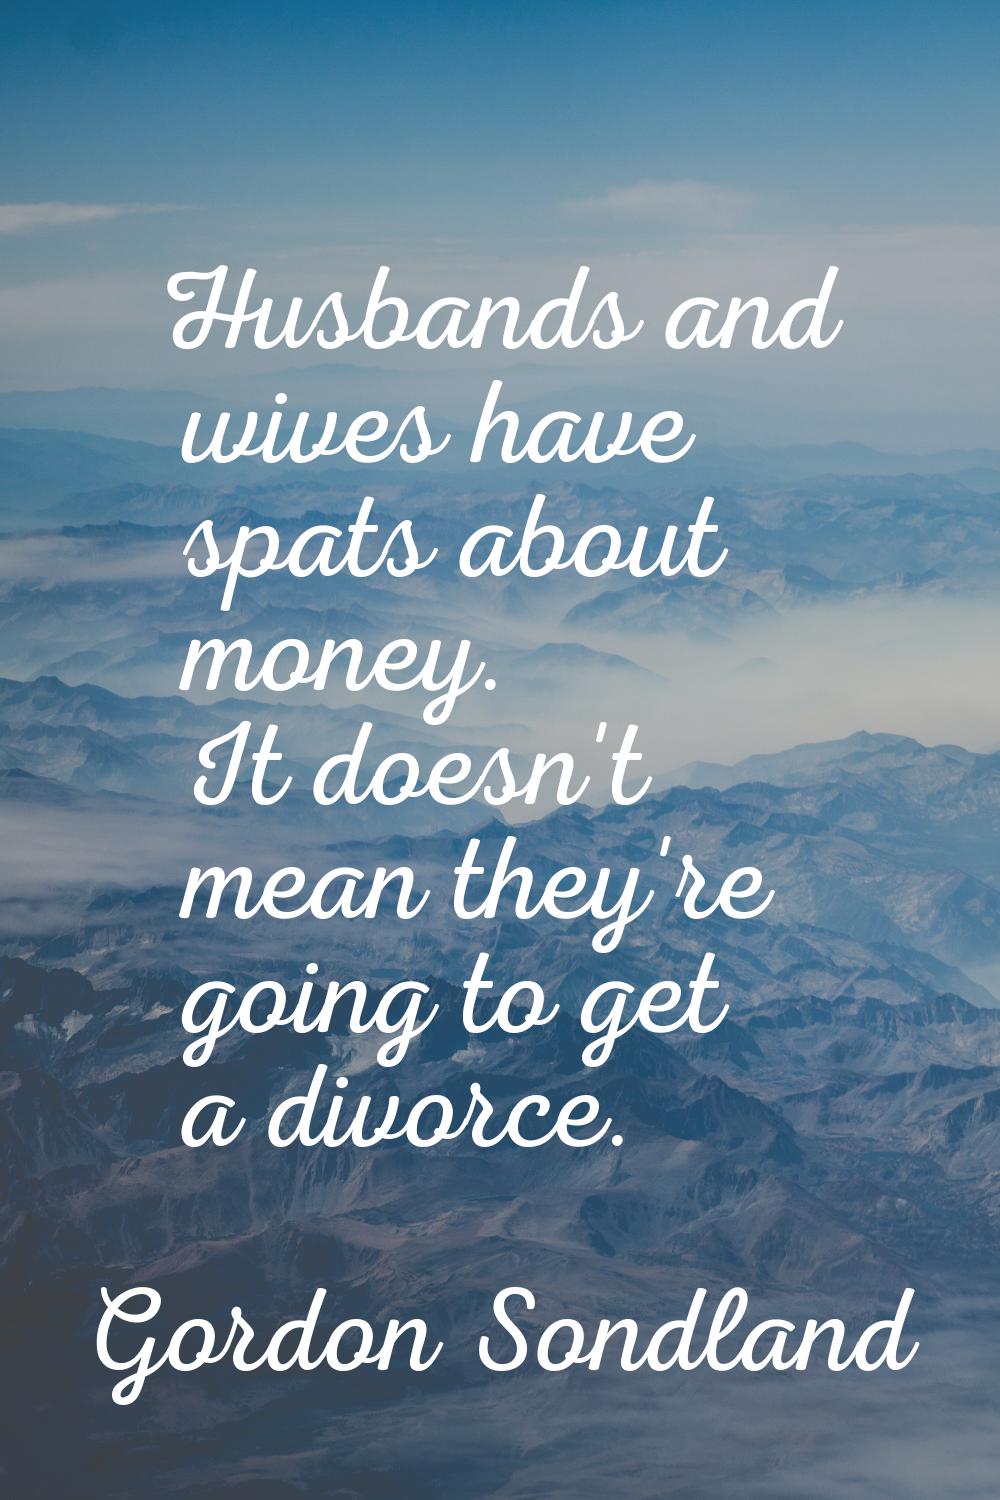 Husbands and wives have spats about money. It doesn't mean they're going to get a divorce.